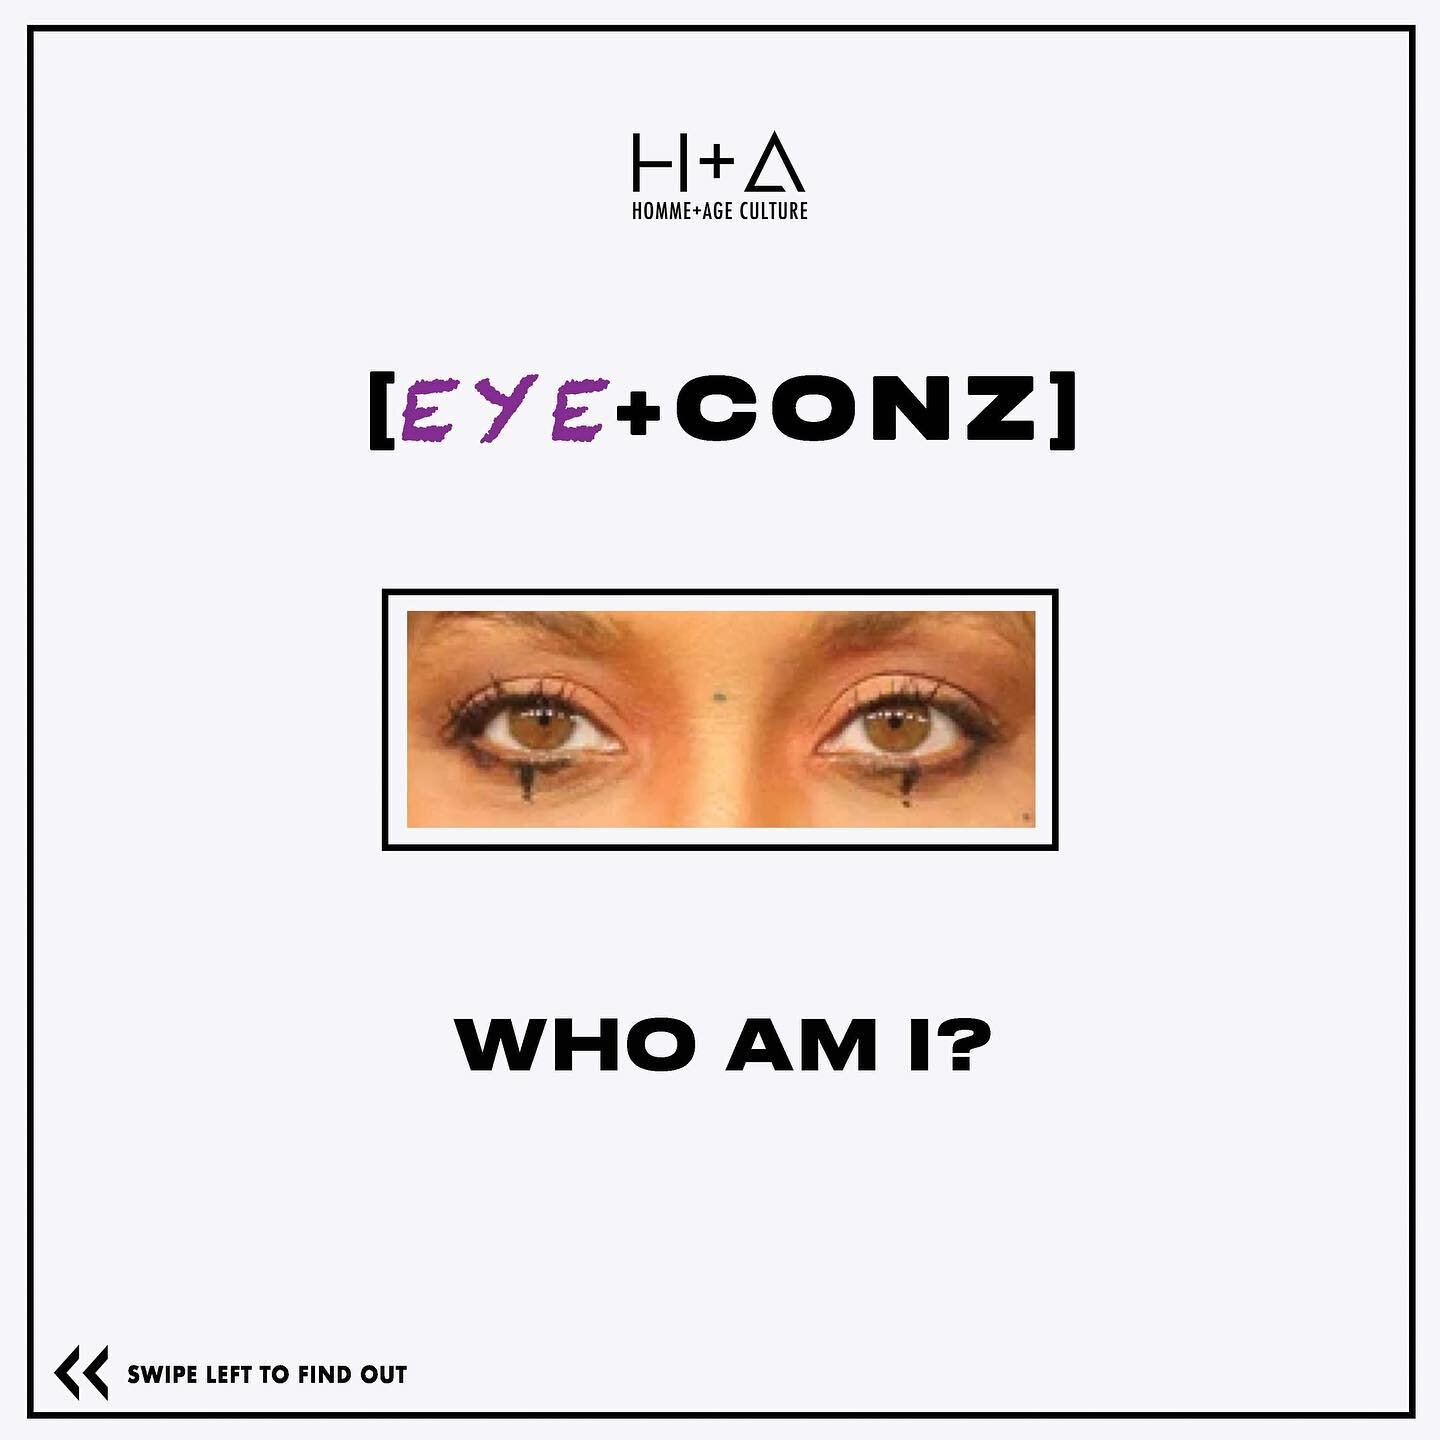 [EYE+CONZ] You betta call on Tyrone...... but you can&rsquo;t use my phone if you don&rsquo;t know who these Eyeconic Eyez belong to!
.
.
.
.
.
Who else could bottle up the fragrance from her love below and sell out!?! A true legend and trailblazer i